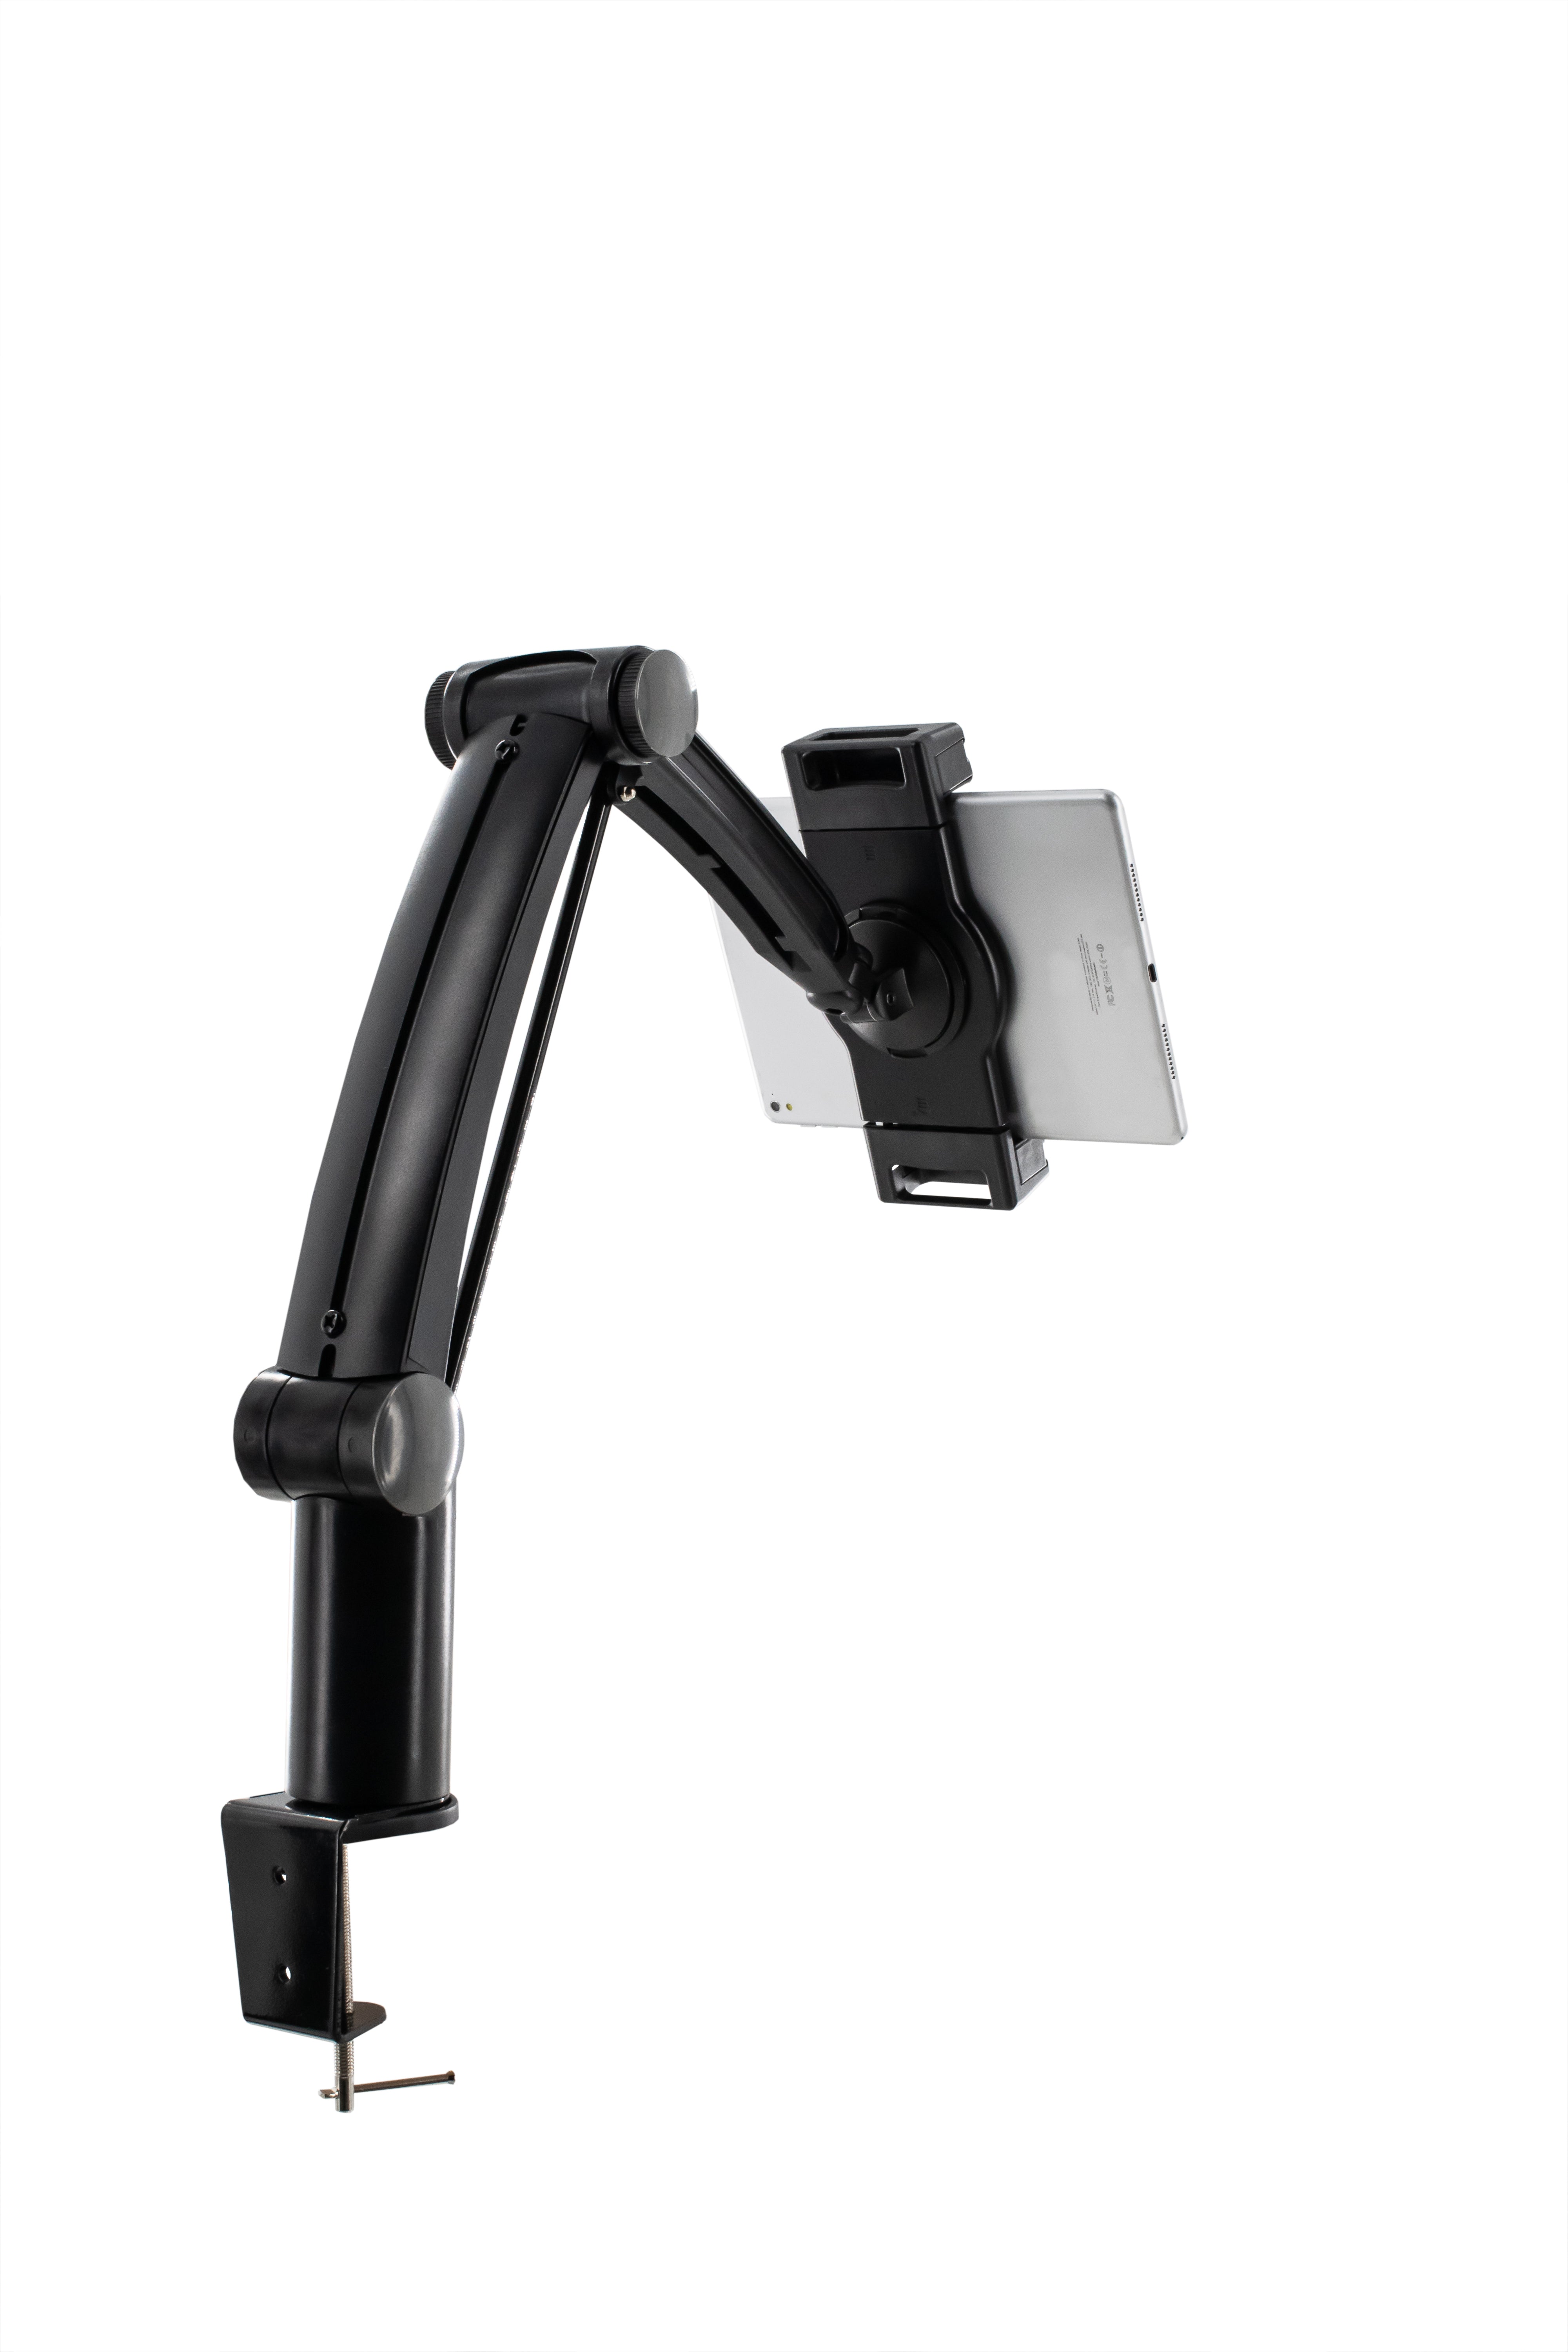 Universal Tablet Mounting Clamp for 7-13 inch tablets